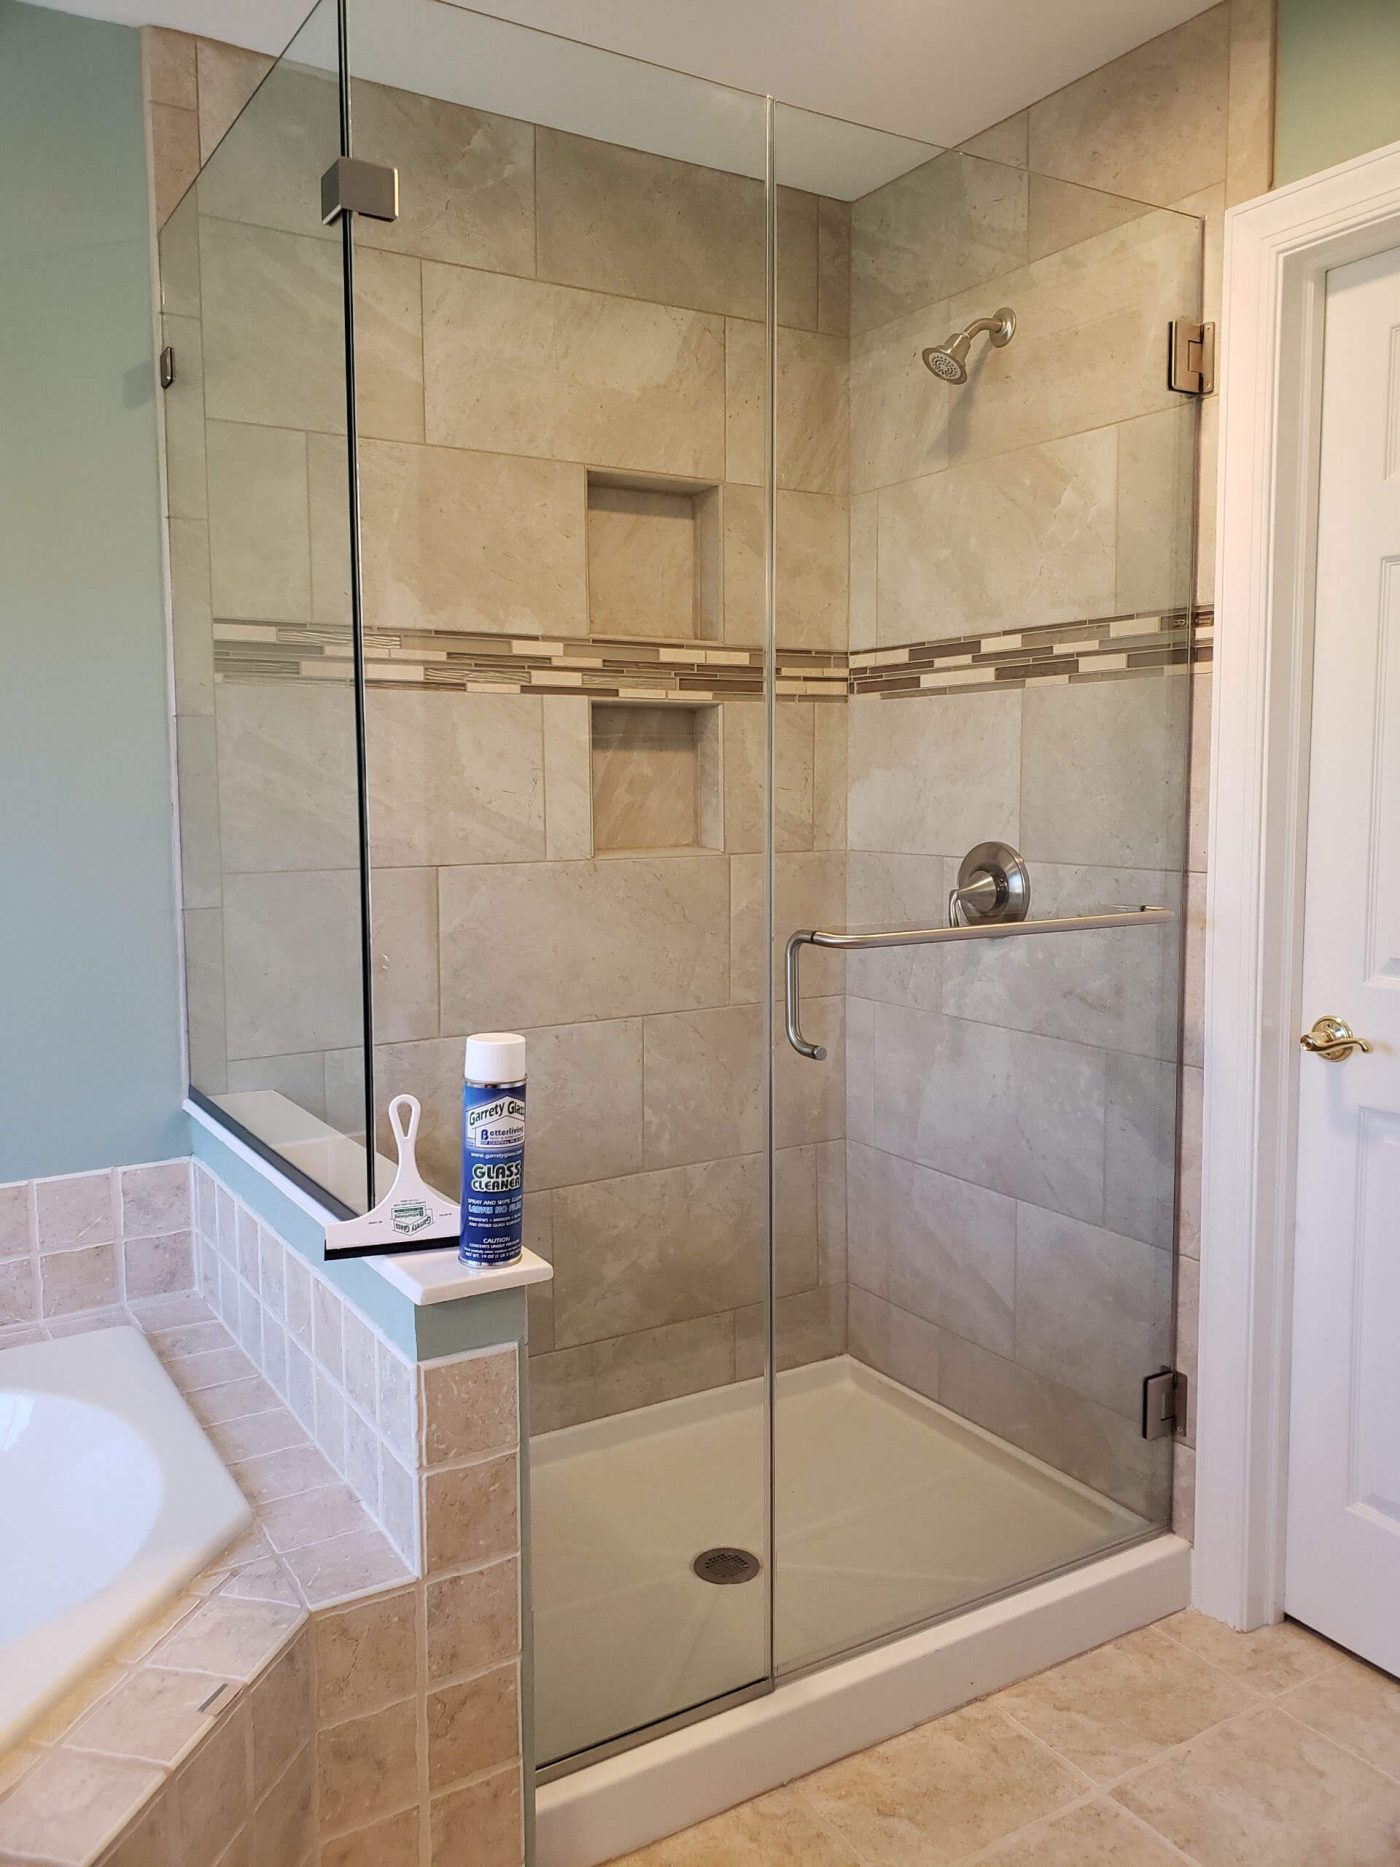 Shower with frameless glass walls and doors